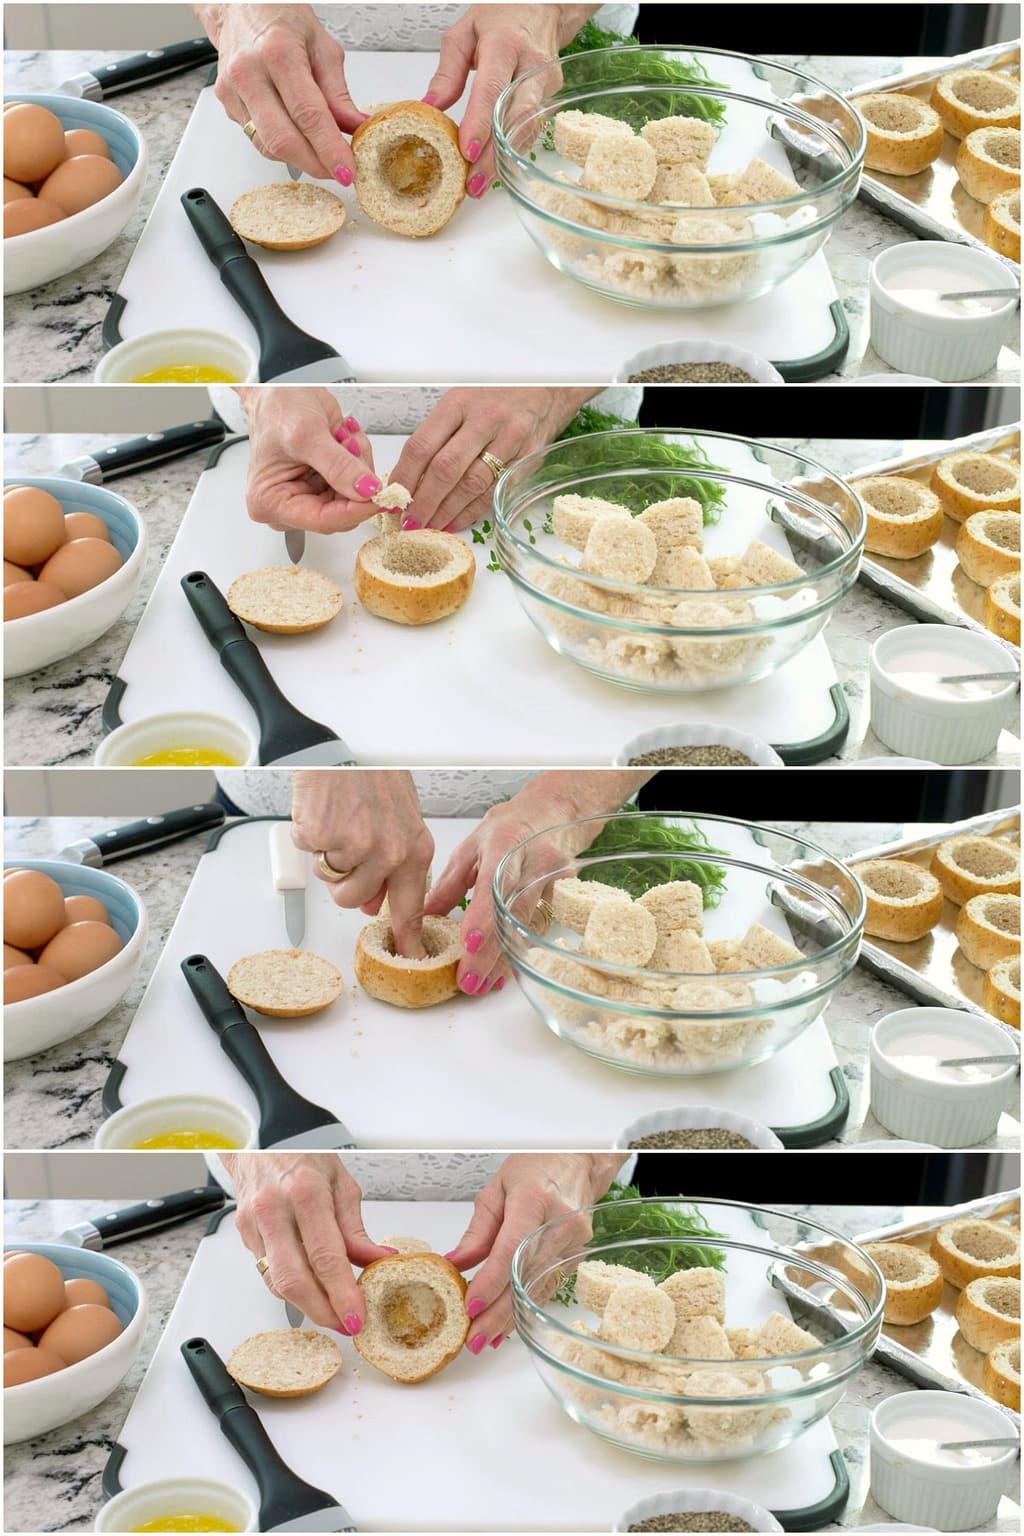 Step-by-step photo collage of how to make Baked Eggs in Bread Baskets - Part 2